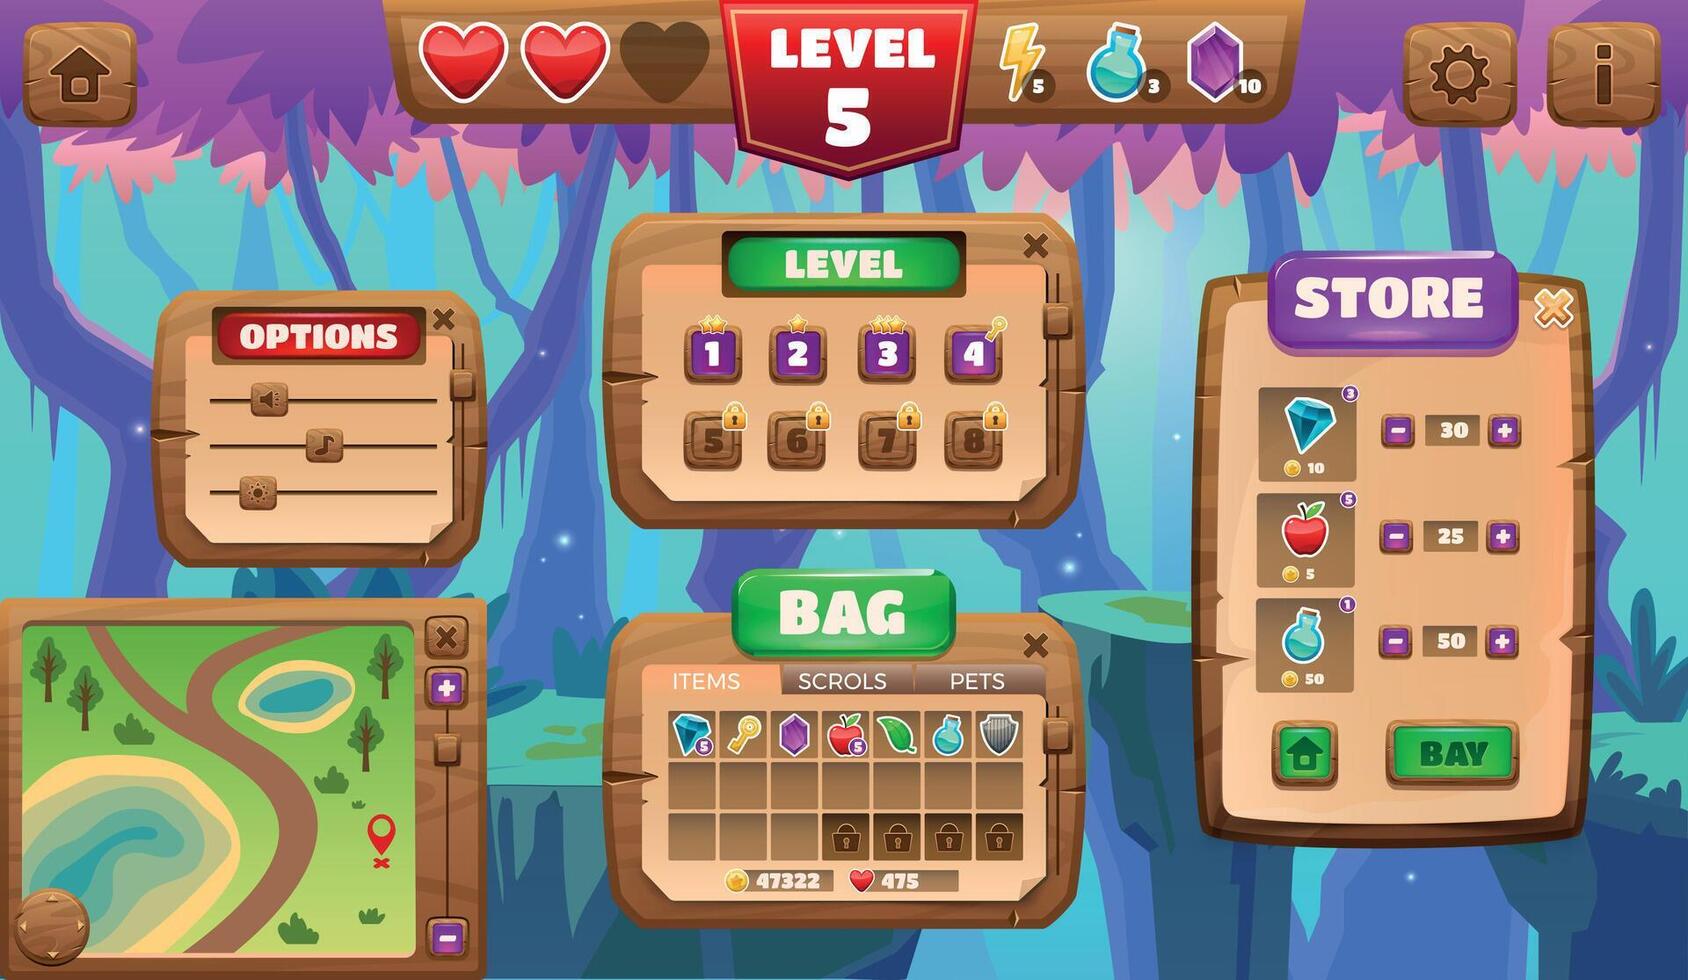 Cartoon game menu screen. Puzzle game background with interface elements, buttons icons menu panel scores and progress bar. Vector casual asset